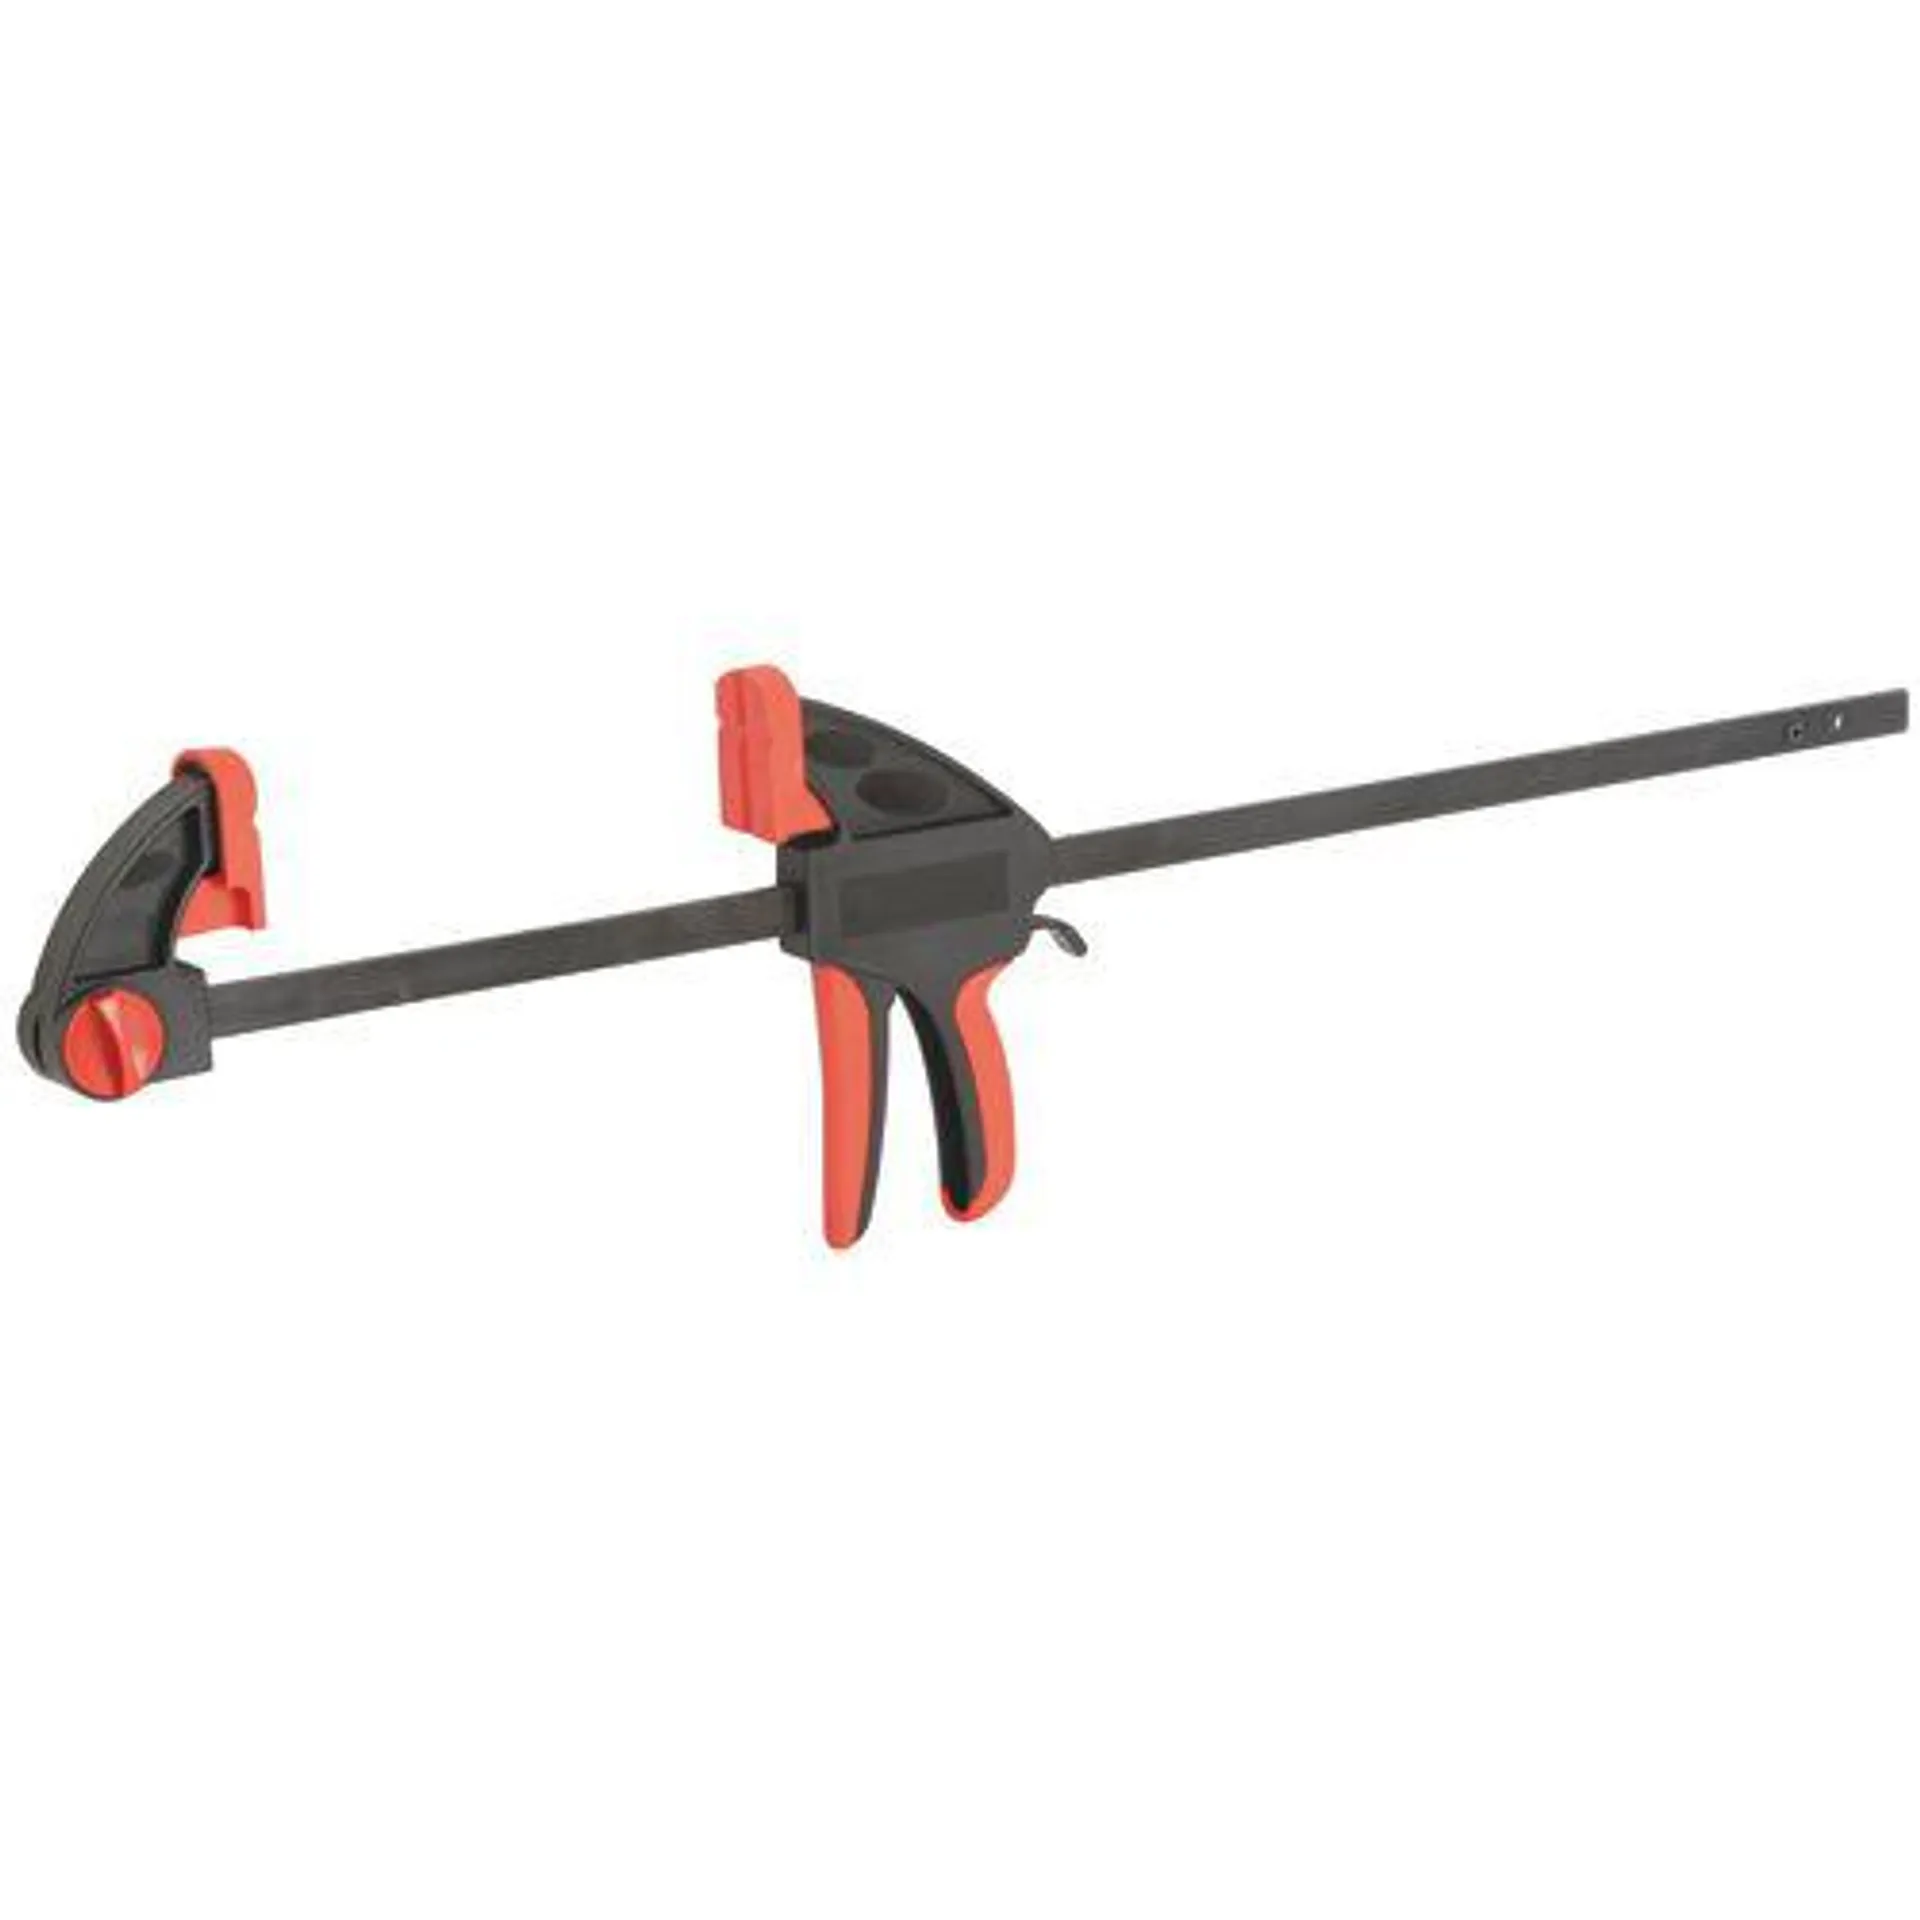 24 in. Ratcheting Bar Clamp/Spreader